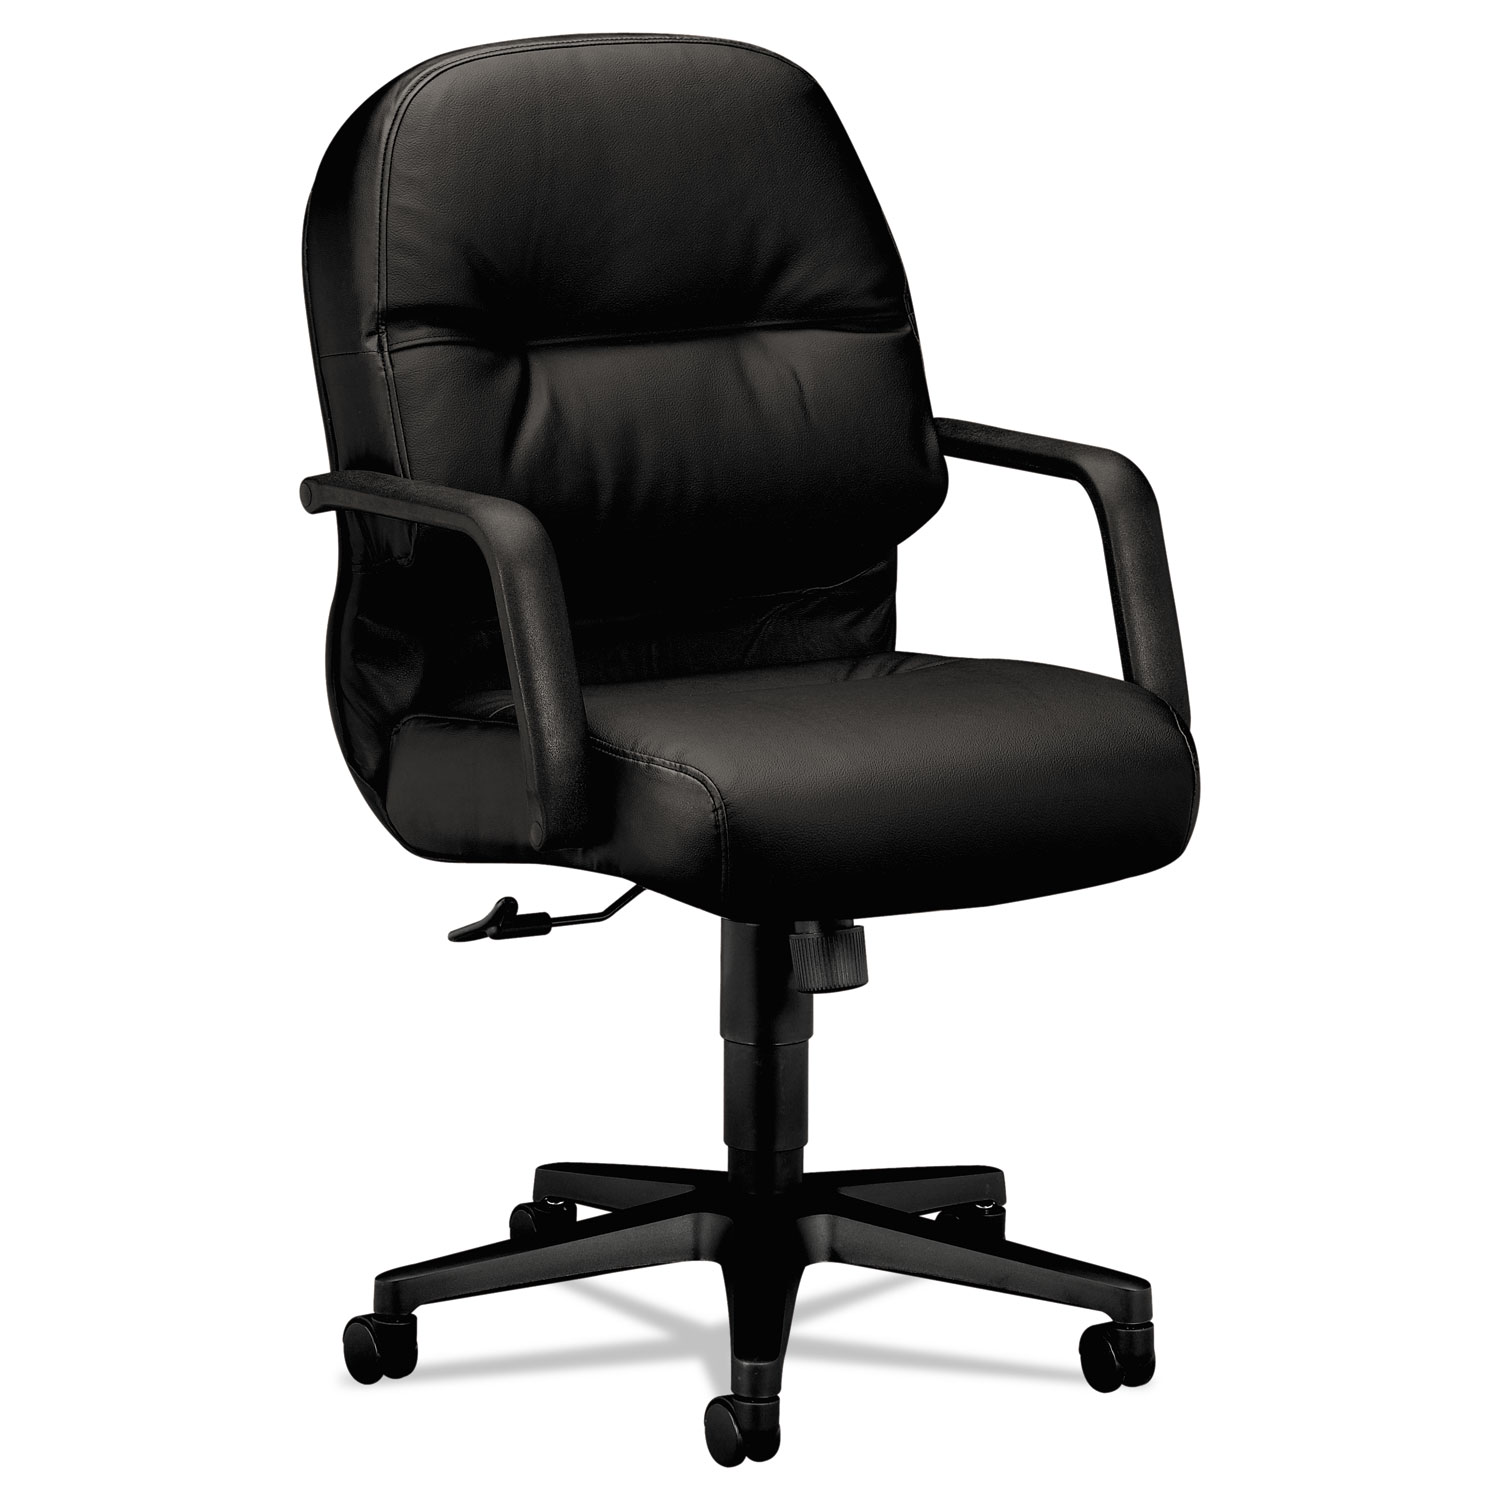  HON H2092.H.SR11.T Pillow-Soft 2090 Series Leather Managerial Mid-Back Swivel/Tilt Chair, Supports up to 300 lbs., Black Seat/Back, Black Base (HON2092SR11T) 